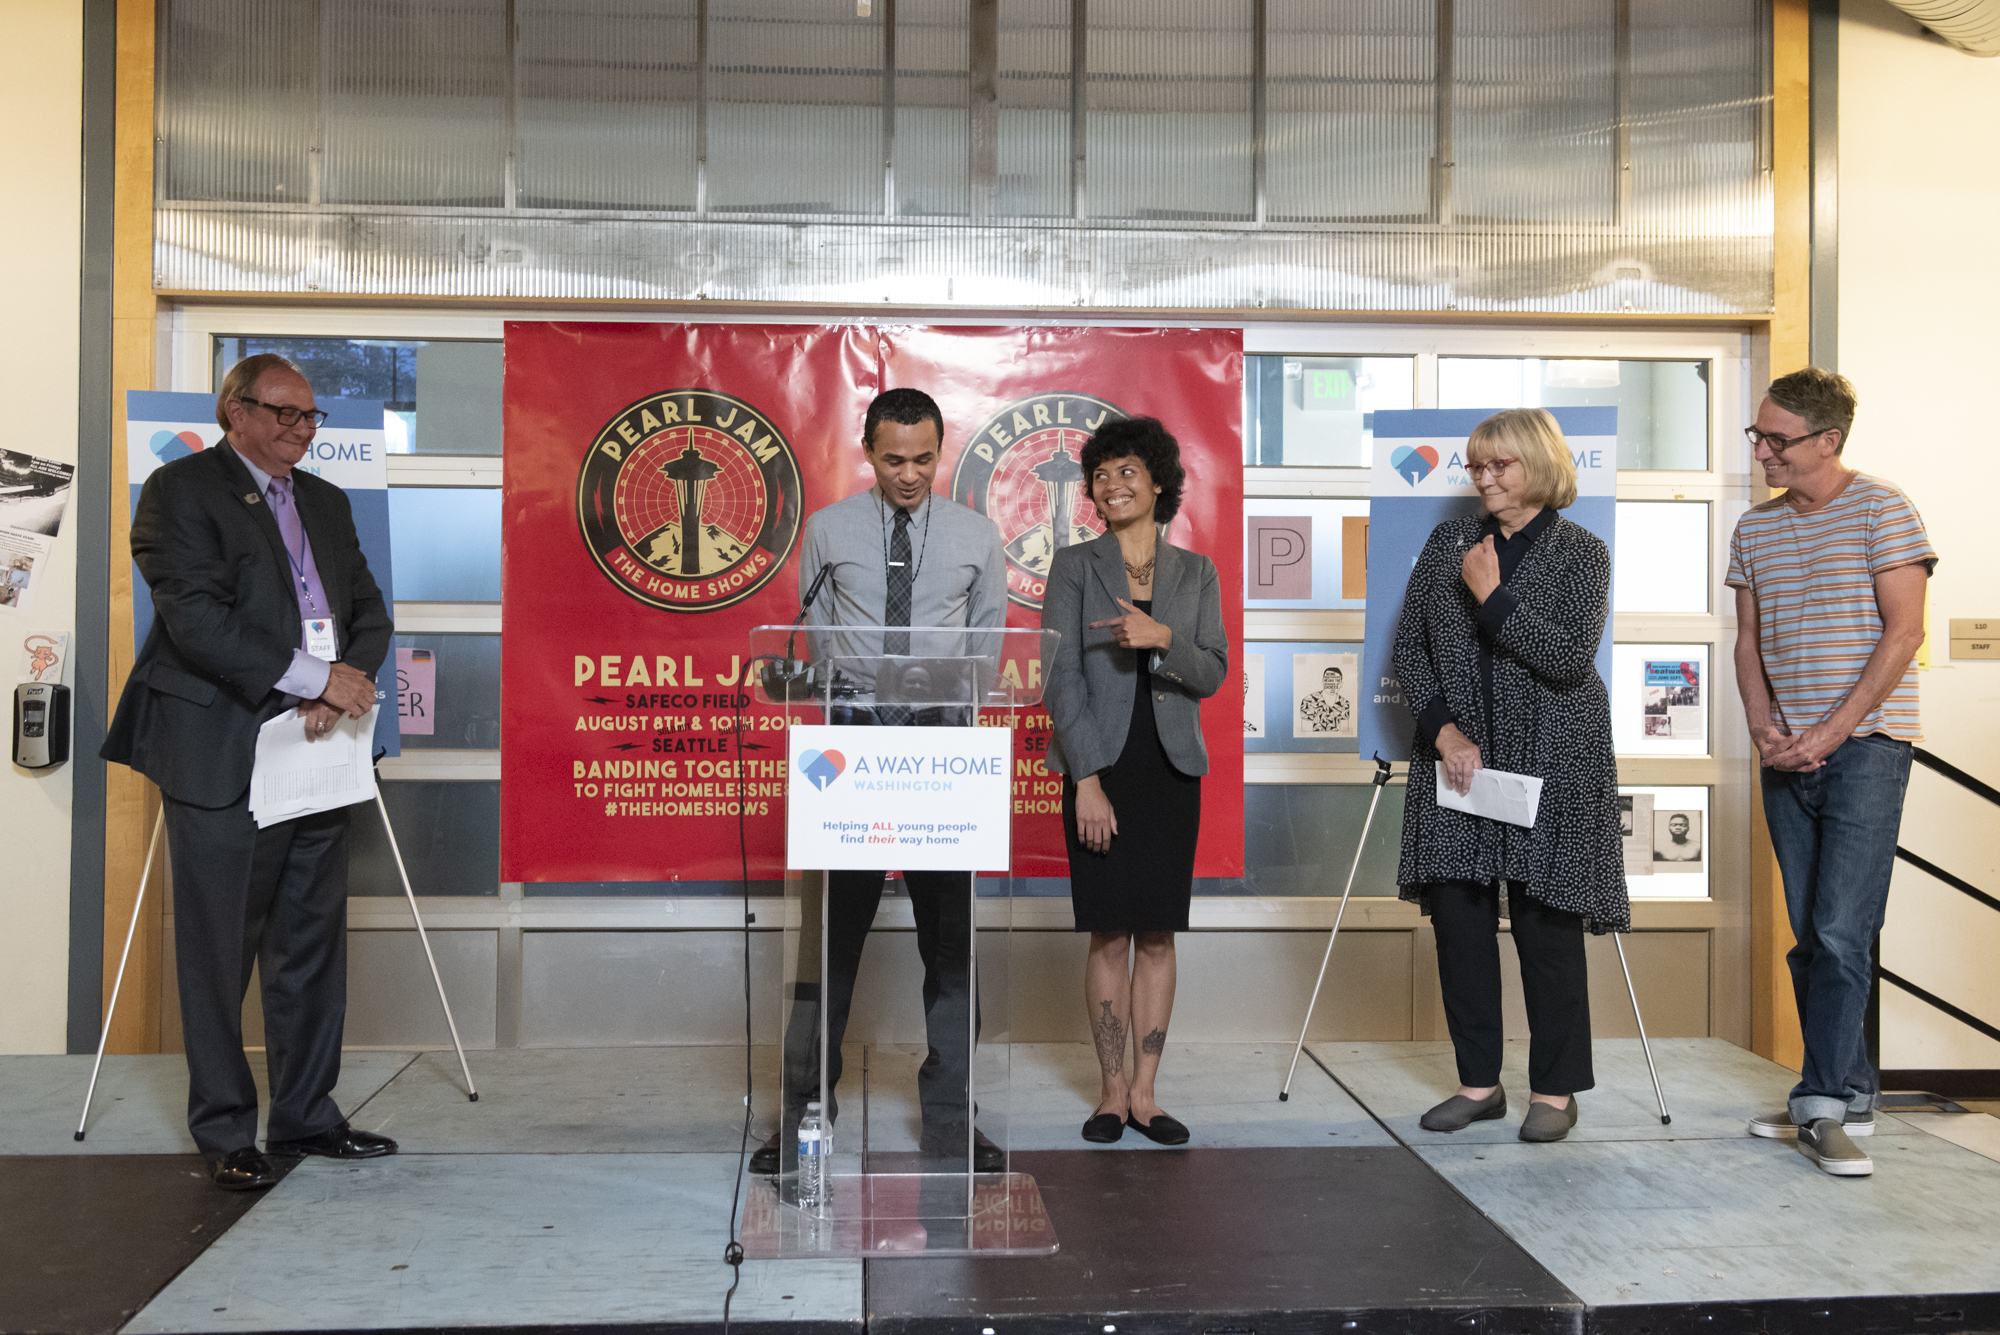 20180927-youth.homelessness.press.conference-022.jpg